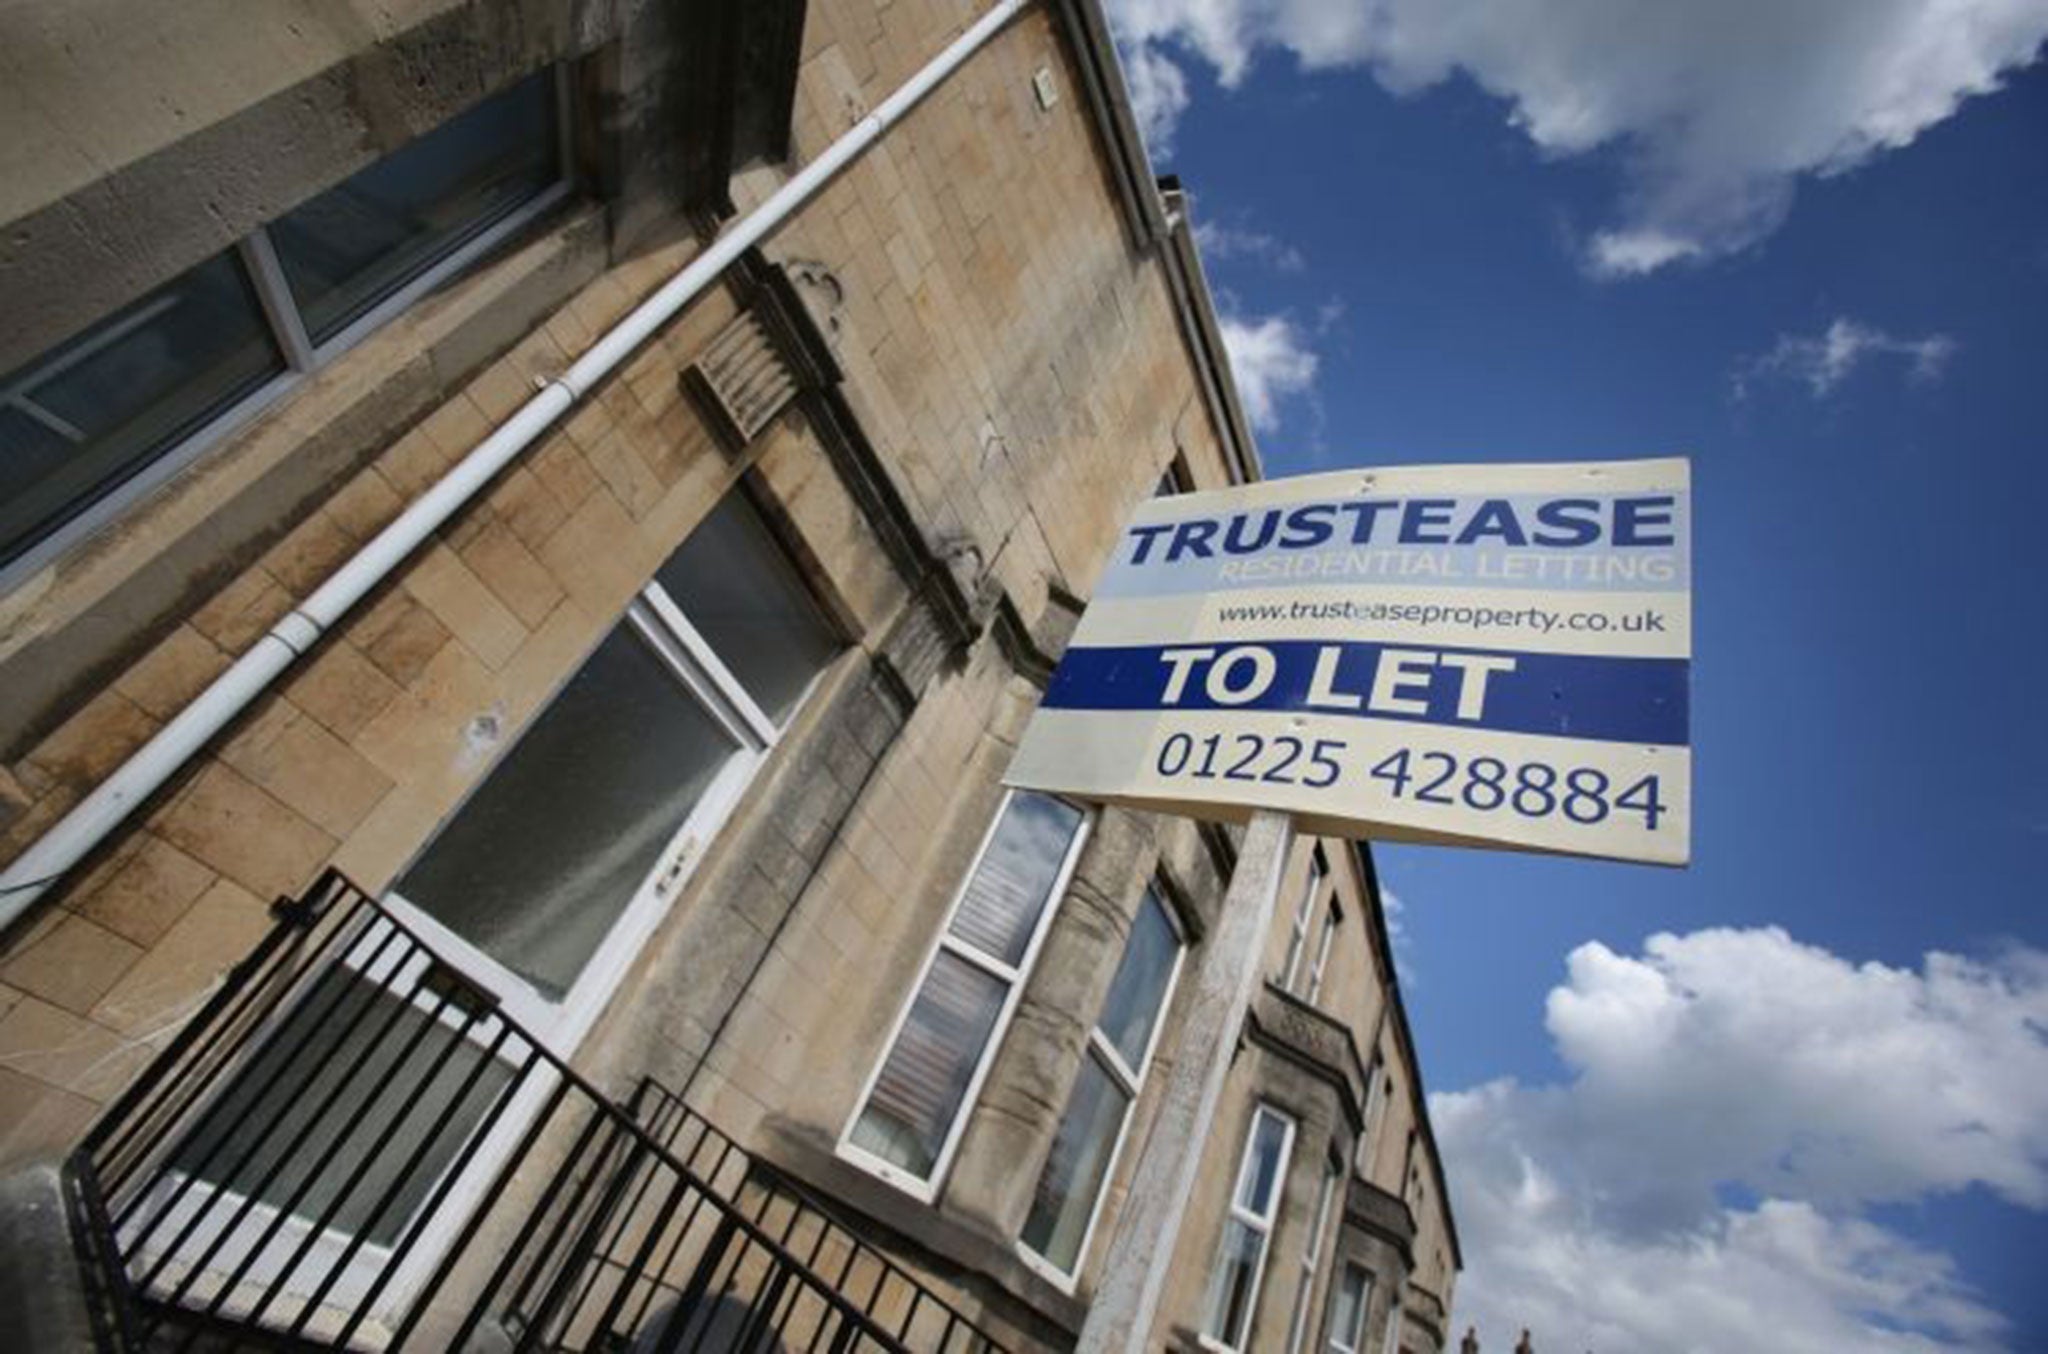 Buy-to-let is on the rise